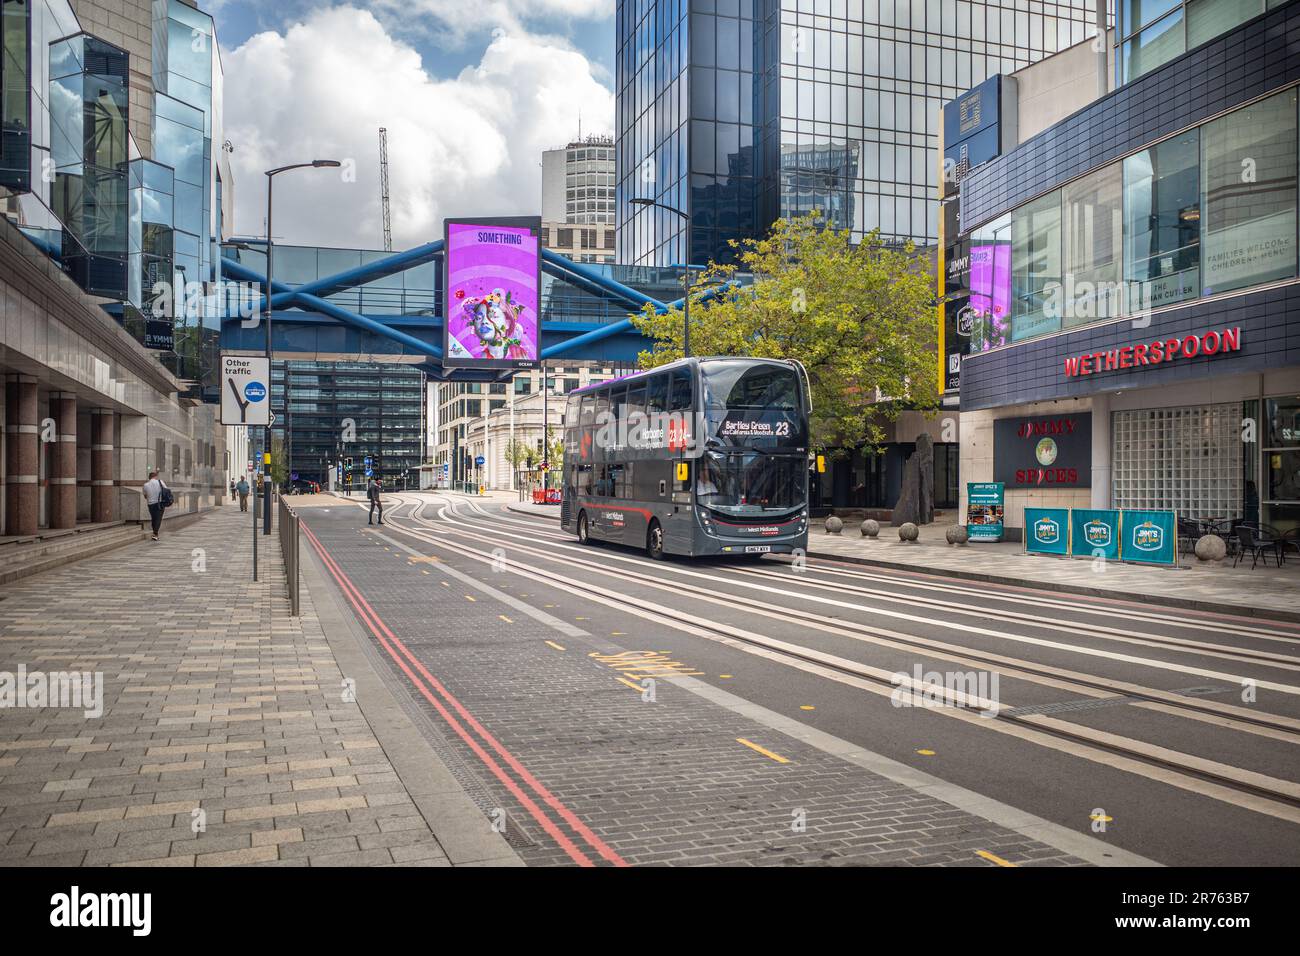 A double decker bus travelling along Broad Street in Birmingham. Urban, cityscape featuring public transport. Stock Photo